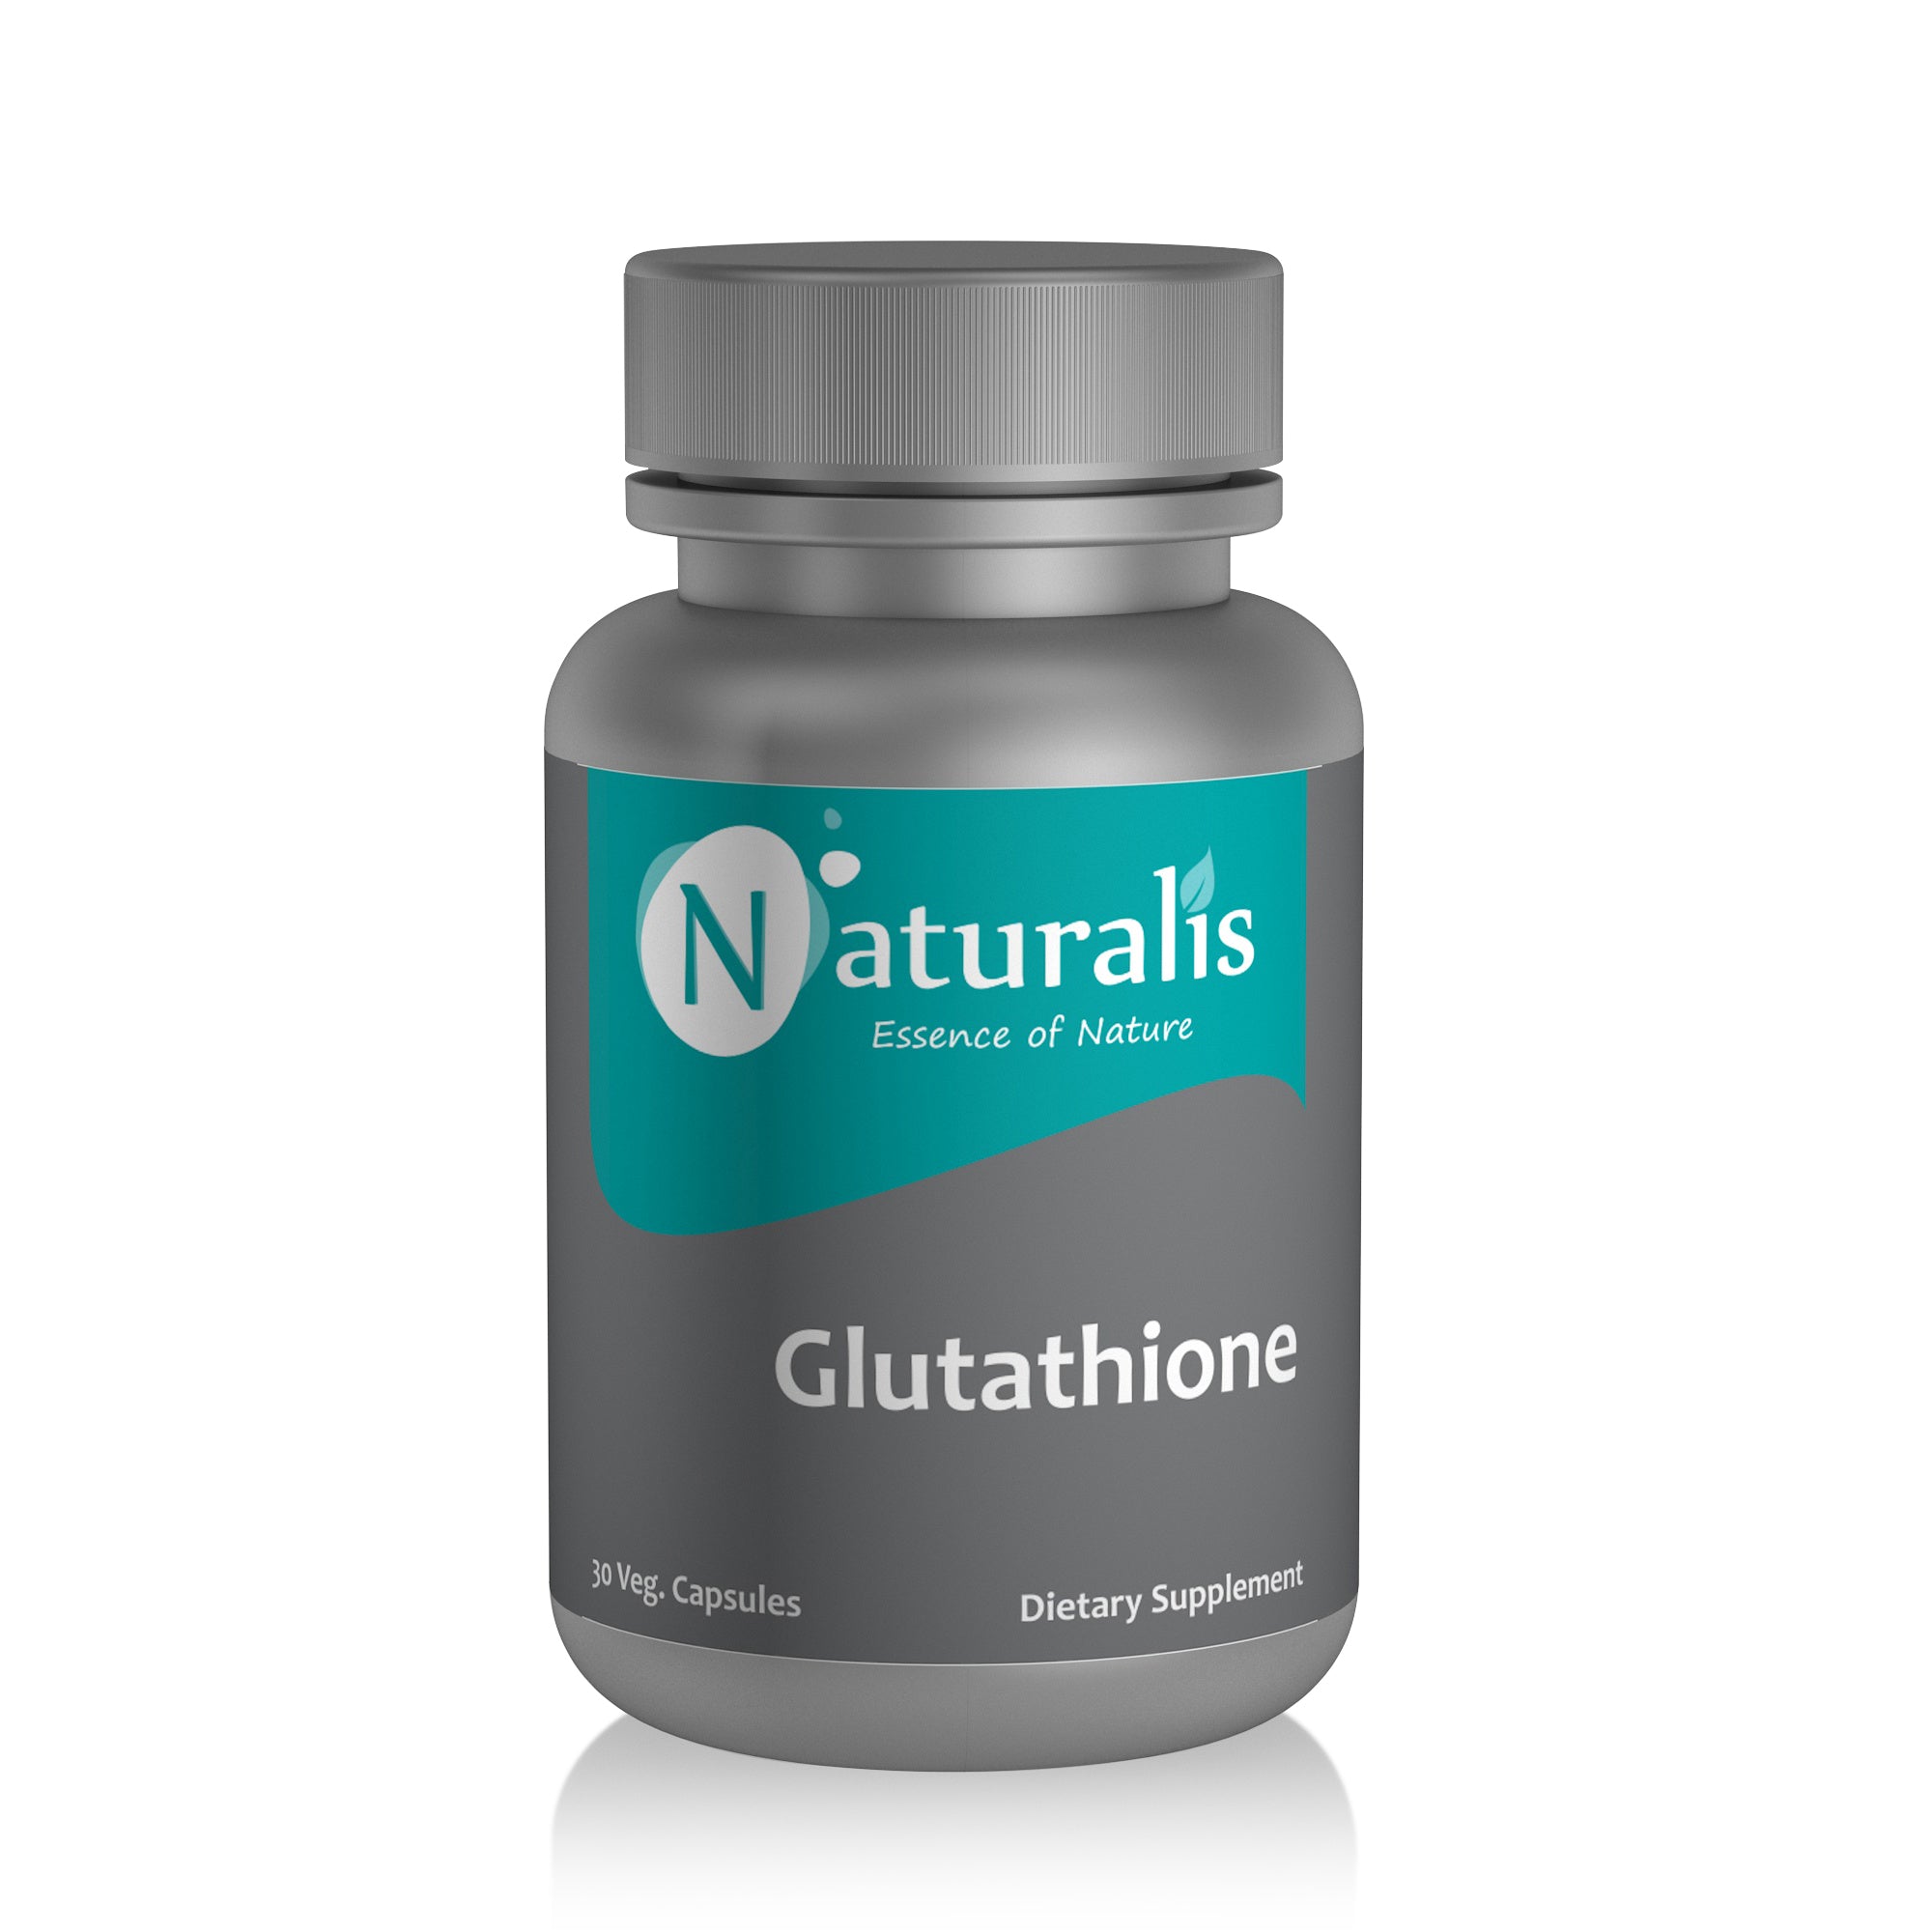 Naturalis Essence of Nature Glutathione 250mg (For Skin and Antioxidant support) – 30 Veg capsules - Naturalis